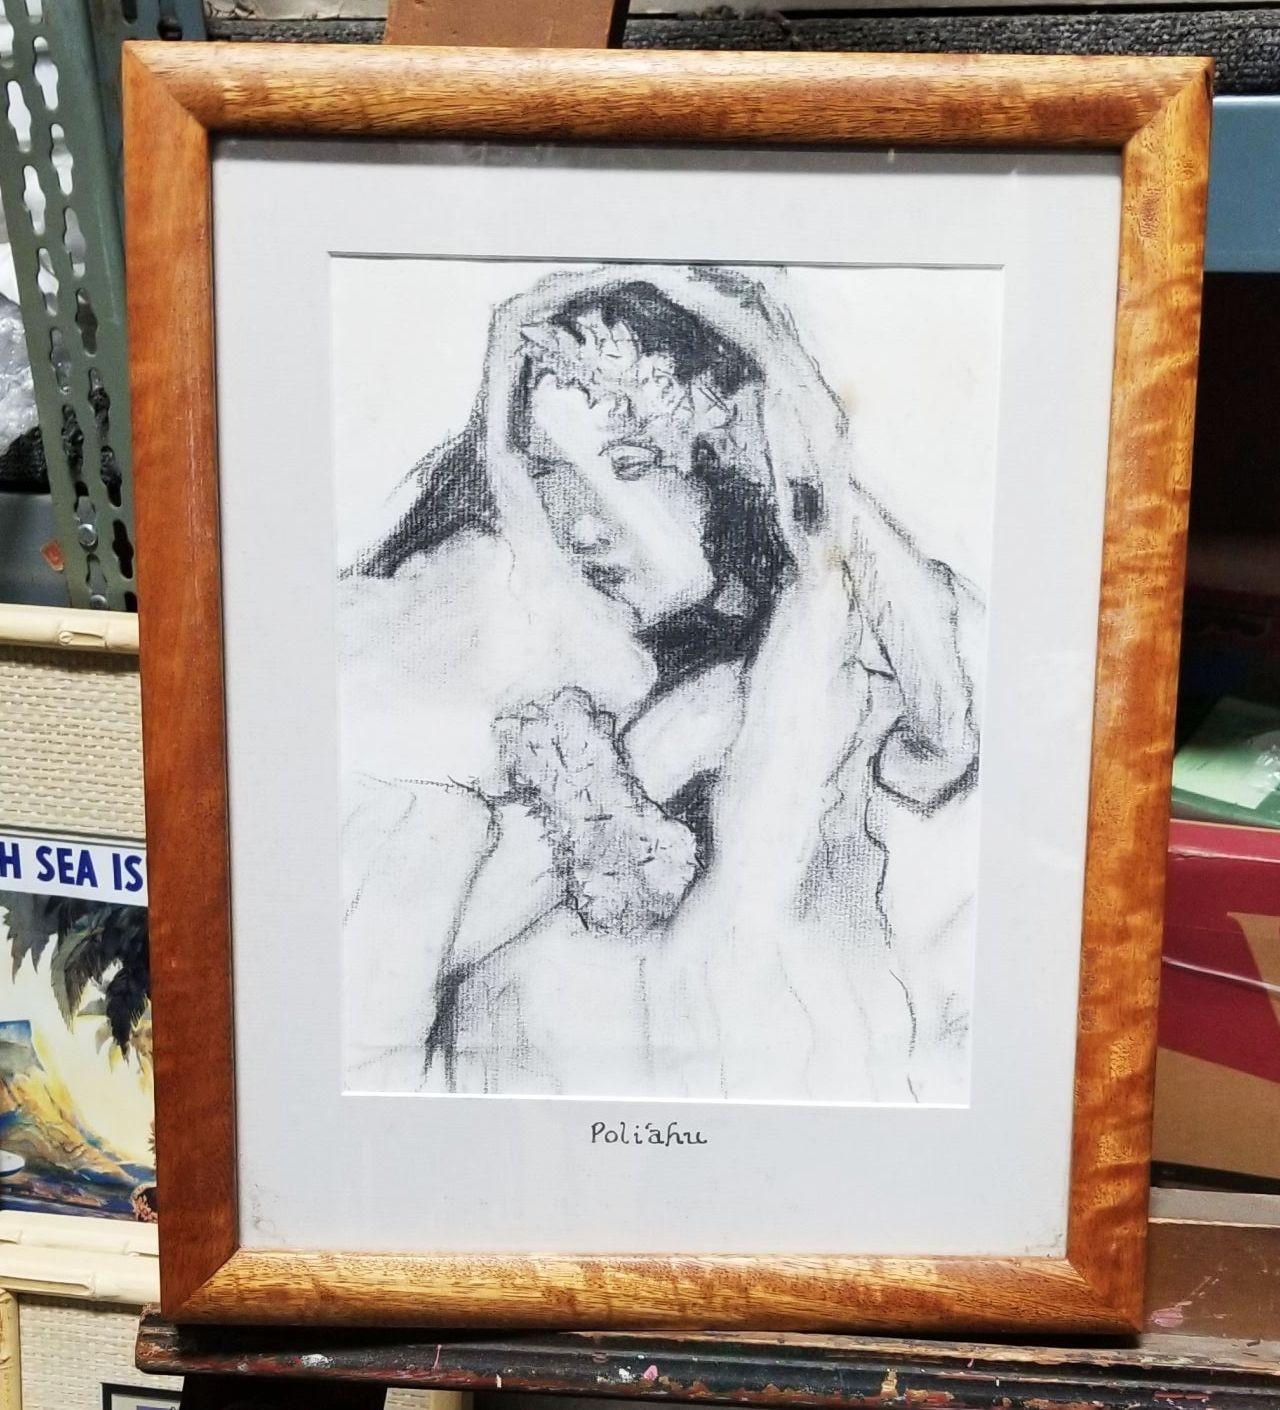 Female portrait charcoal drawling featuring  Poliʻahu a prominent deity in Hawaiian mythology, revered as the goddess of snow, ice, and cold. She is one of the four goddesses associated with Mauna Kea and is known for her grace, beauty, and the